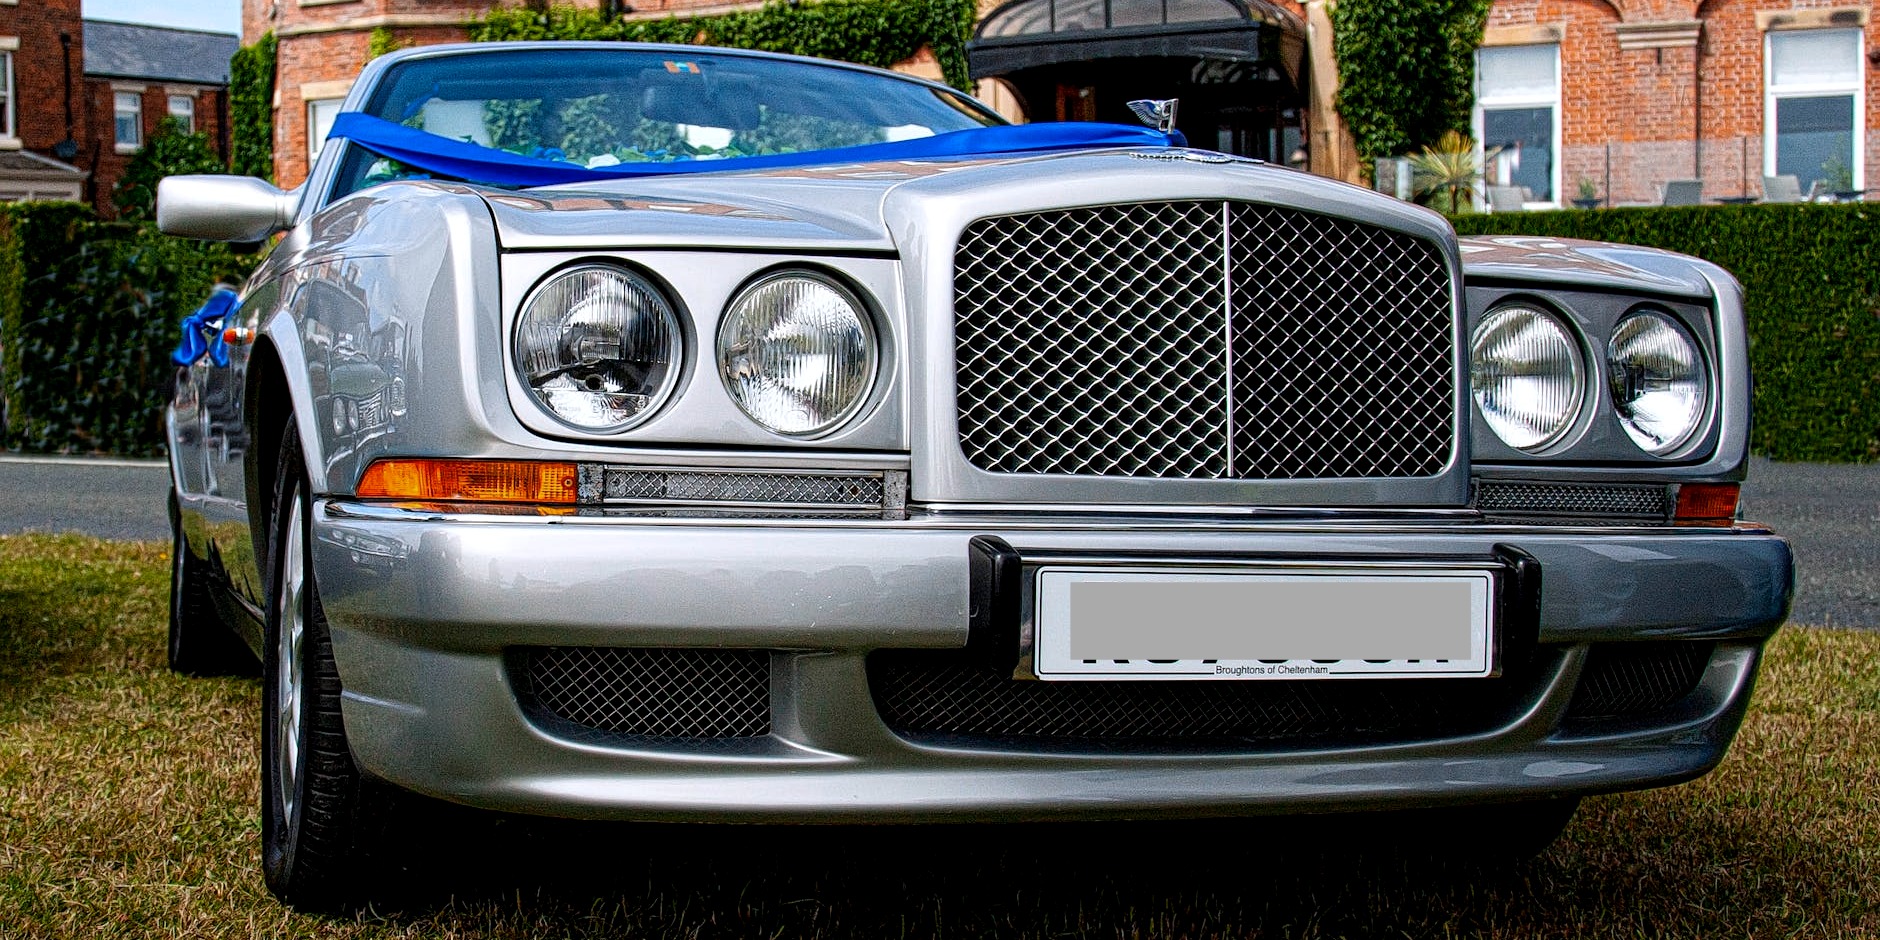 Top Tips for Maintaining Your Bentley: A Guide for Wicklow Owners